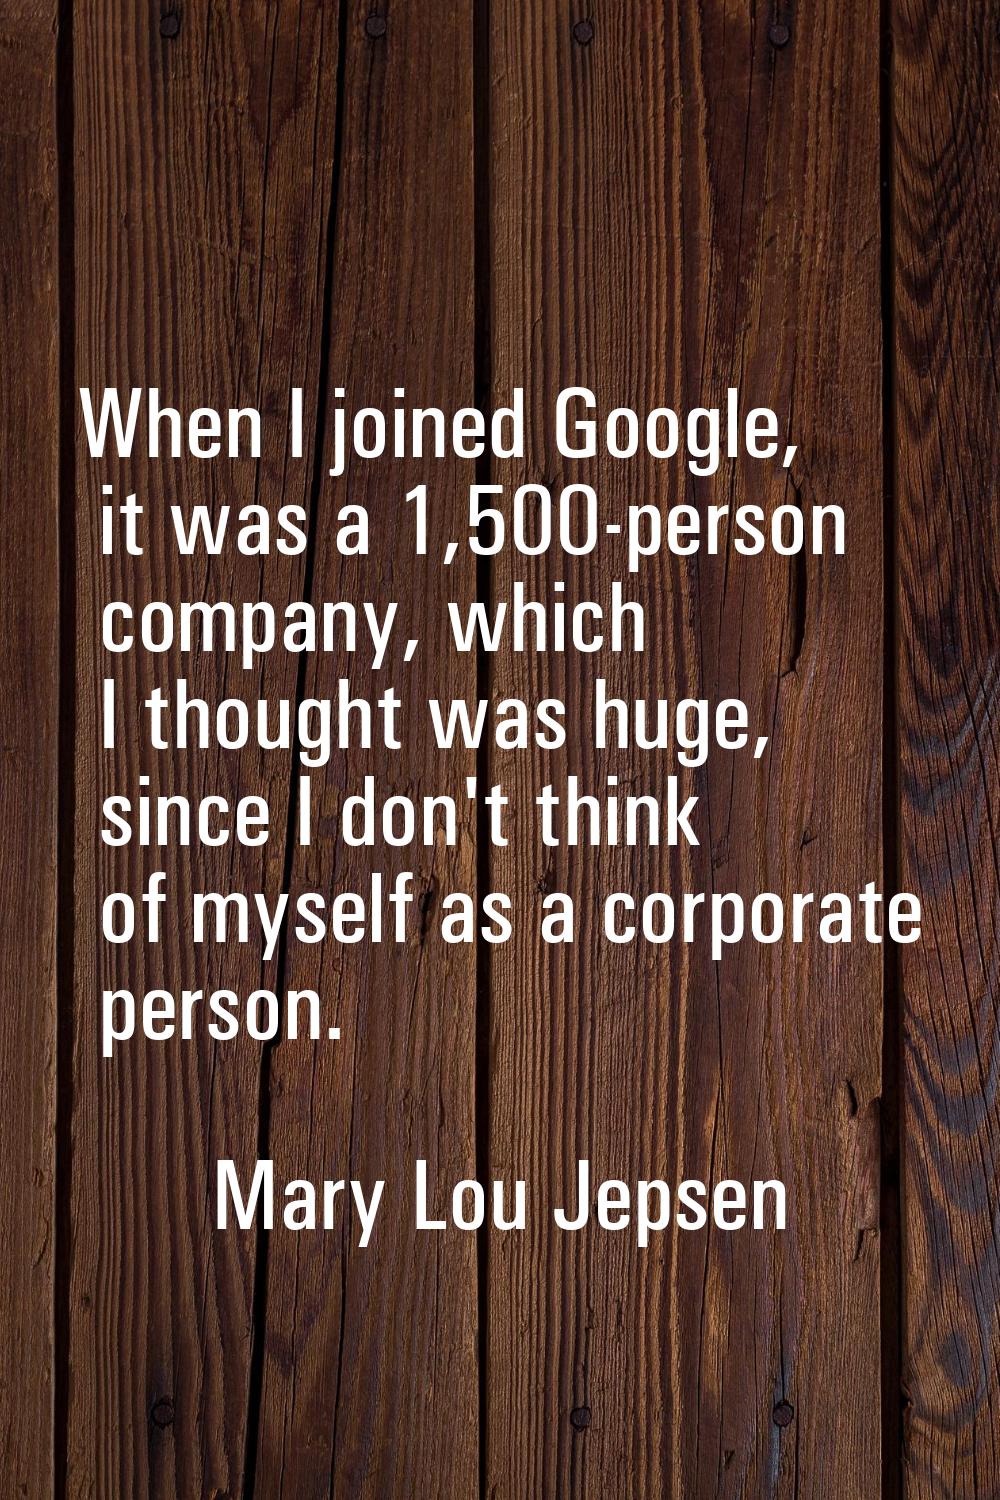 When I joined Google, it was a 1,500-person company, which I thought was huge, since I don't think 